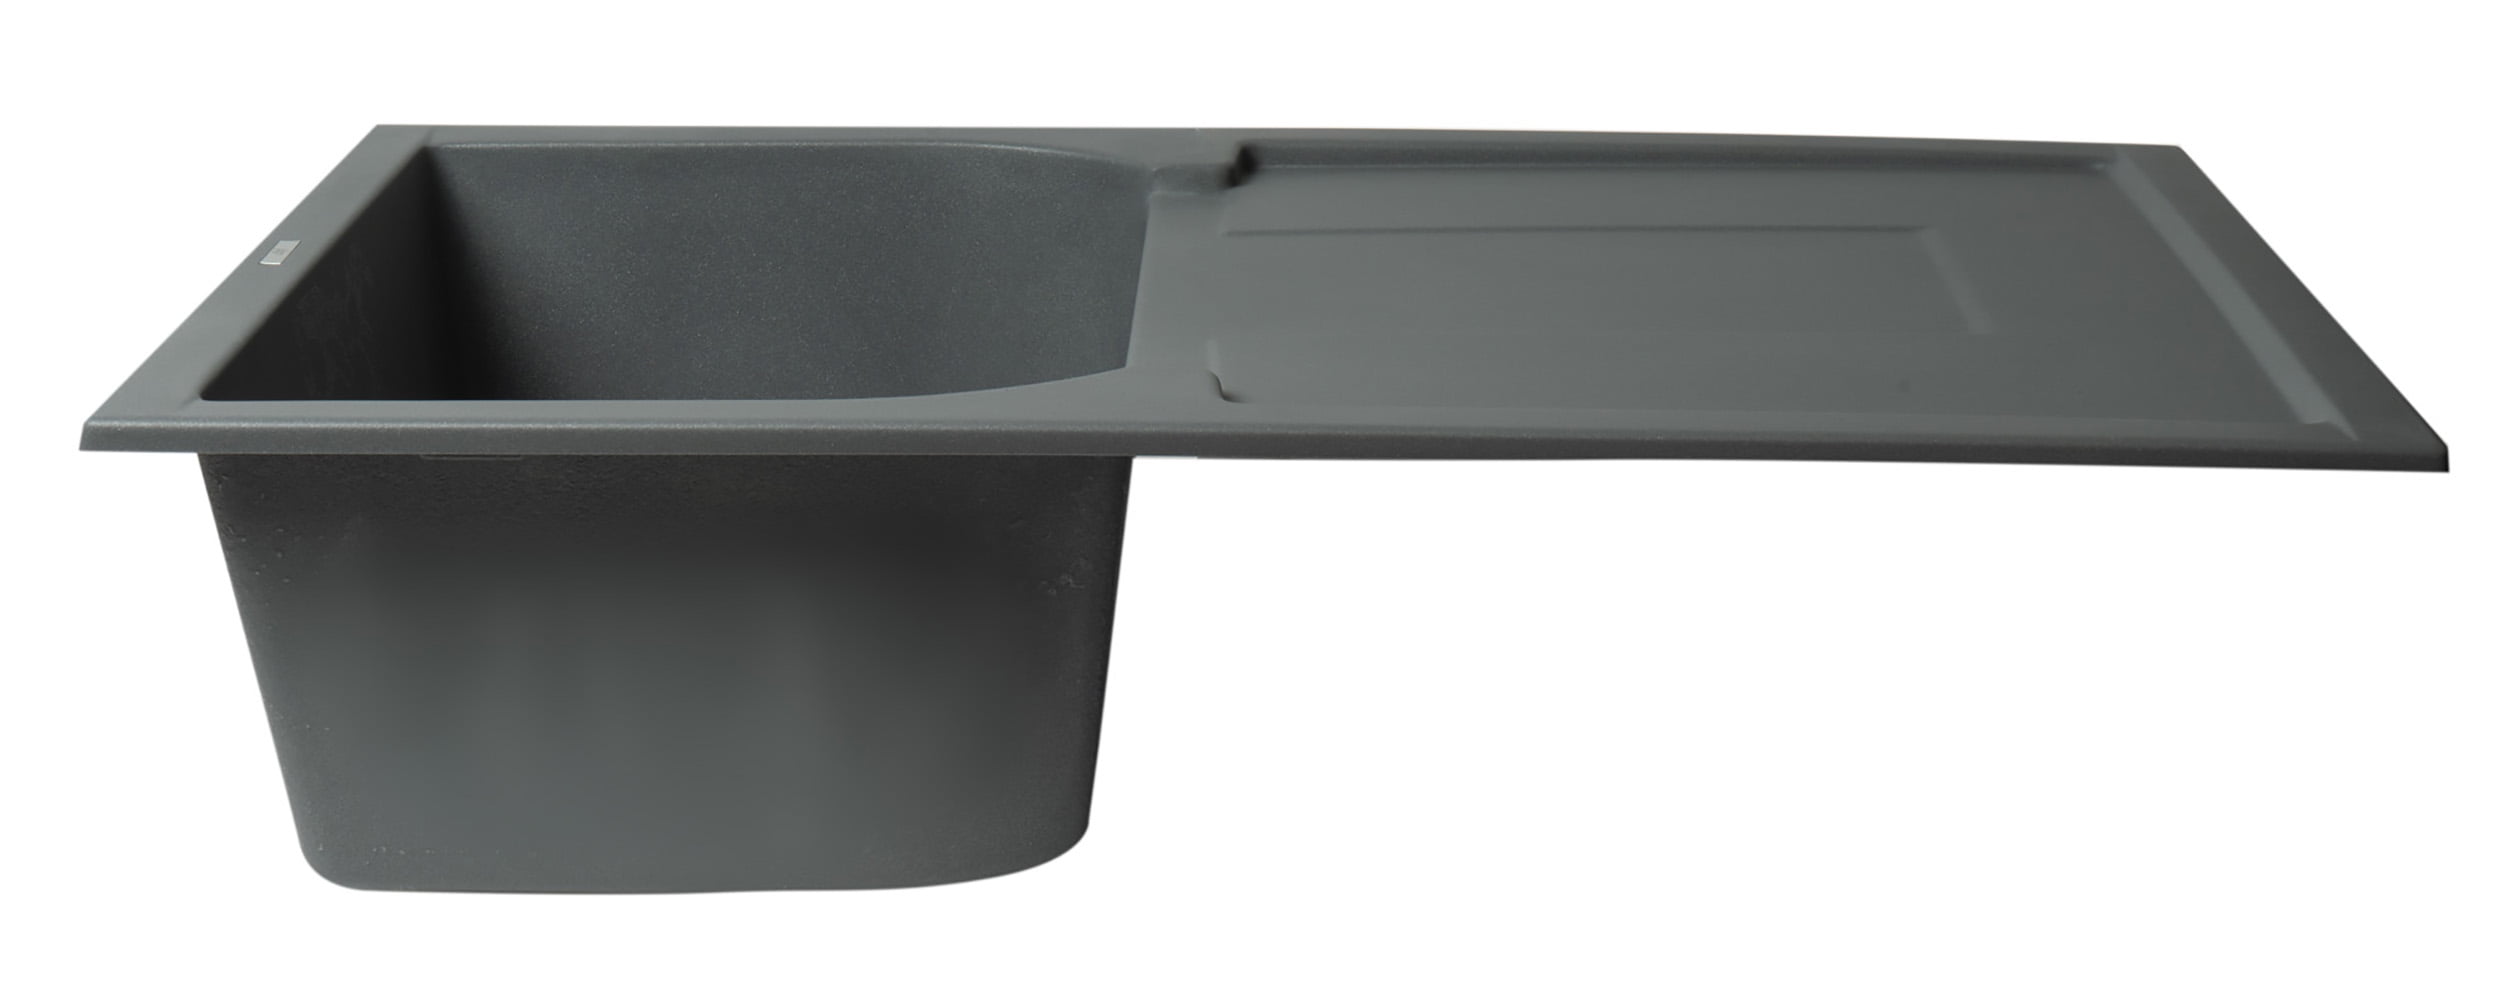 K400 Single built-in stainless steel sink with drainer By Grohe